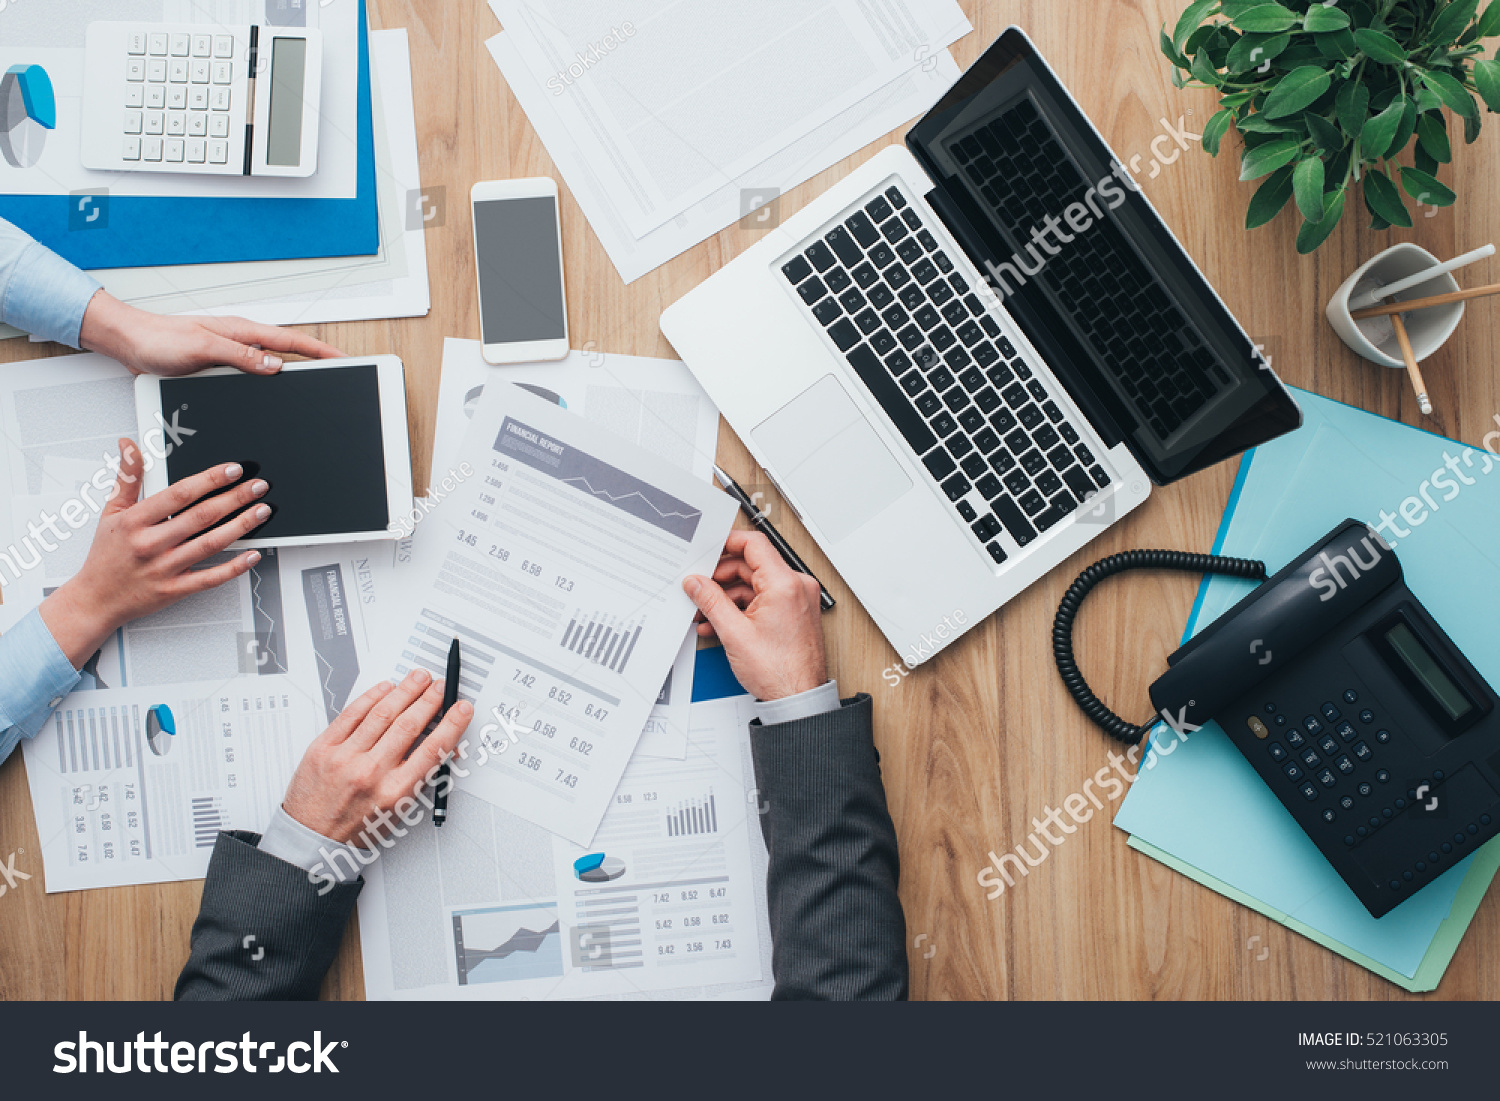 Business team working at office desk and analyzing financial reports, finance and accounting concept, top view #521063305